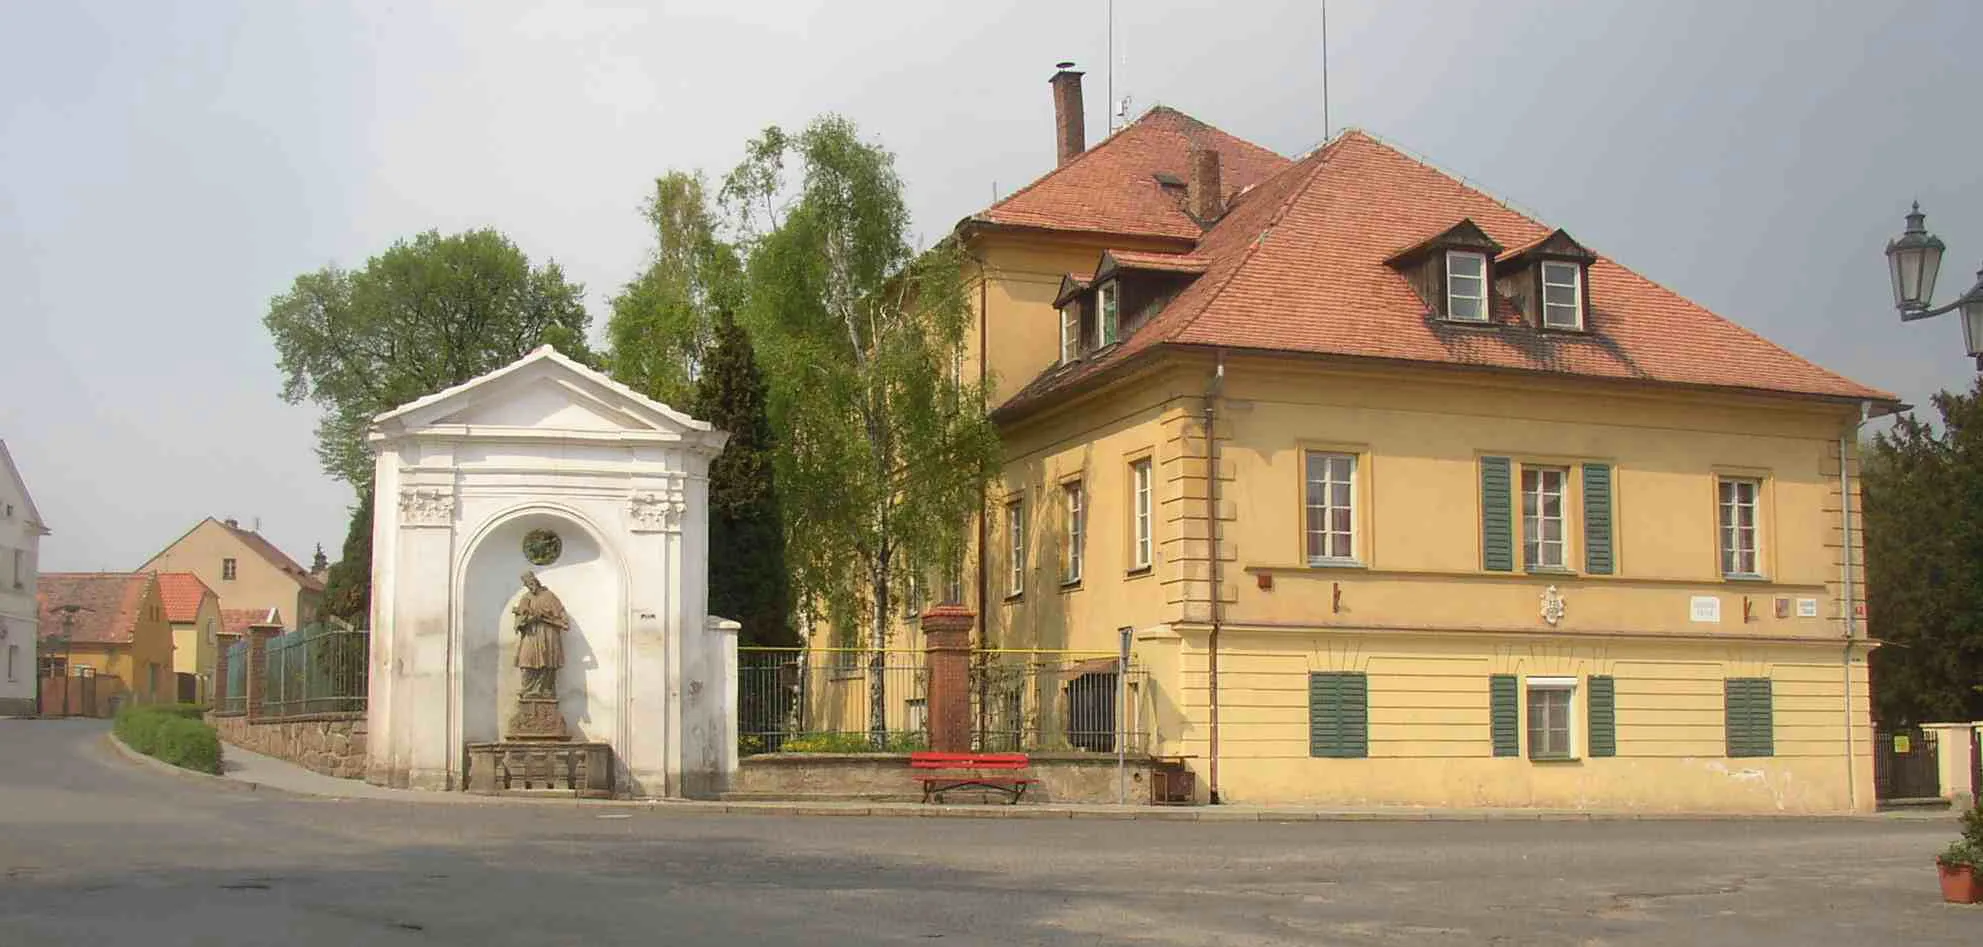 Photo showing: Chapel of St John Nepomucene and side view of manor house (today a school) in Třebívlice, Czech Republic.